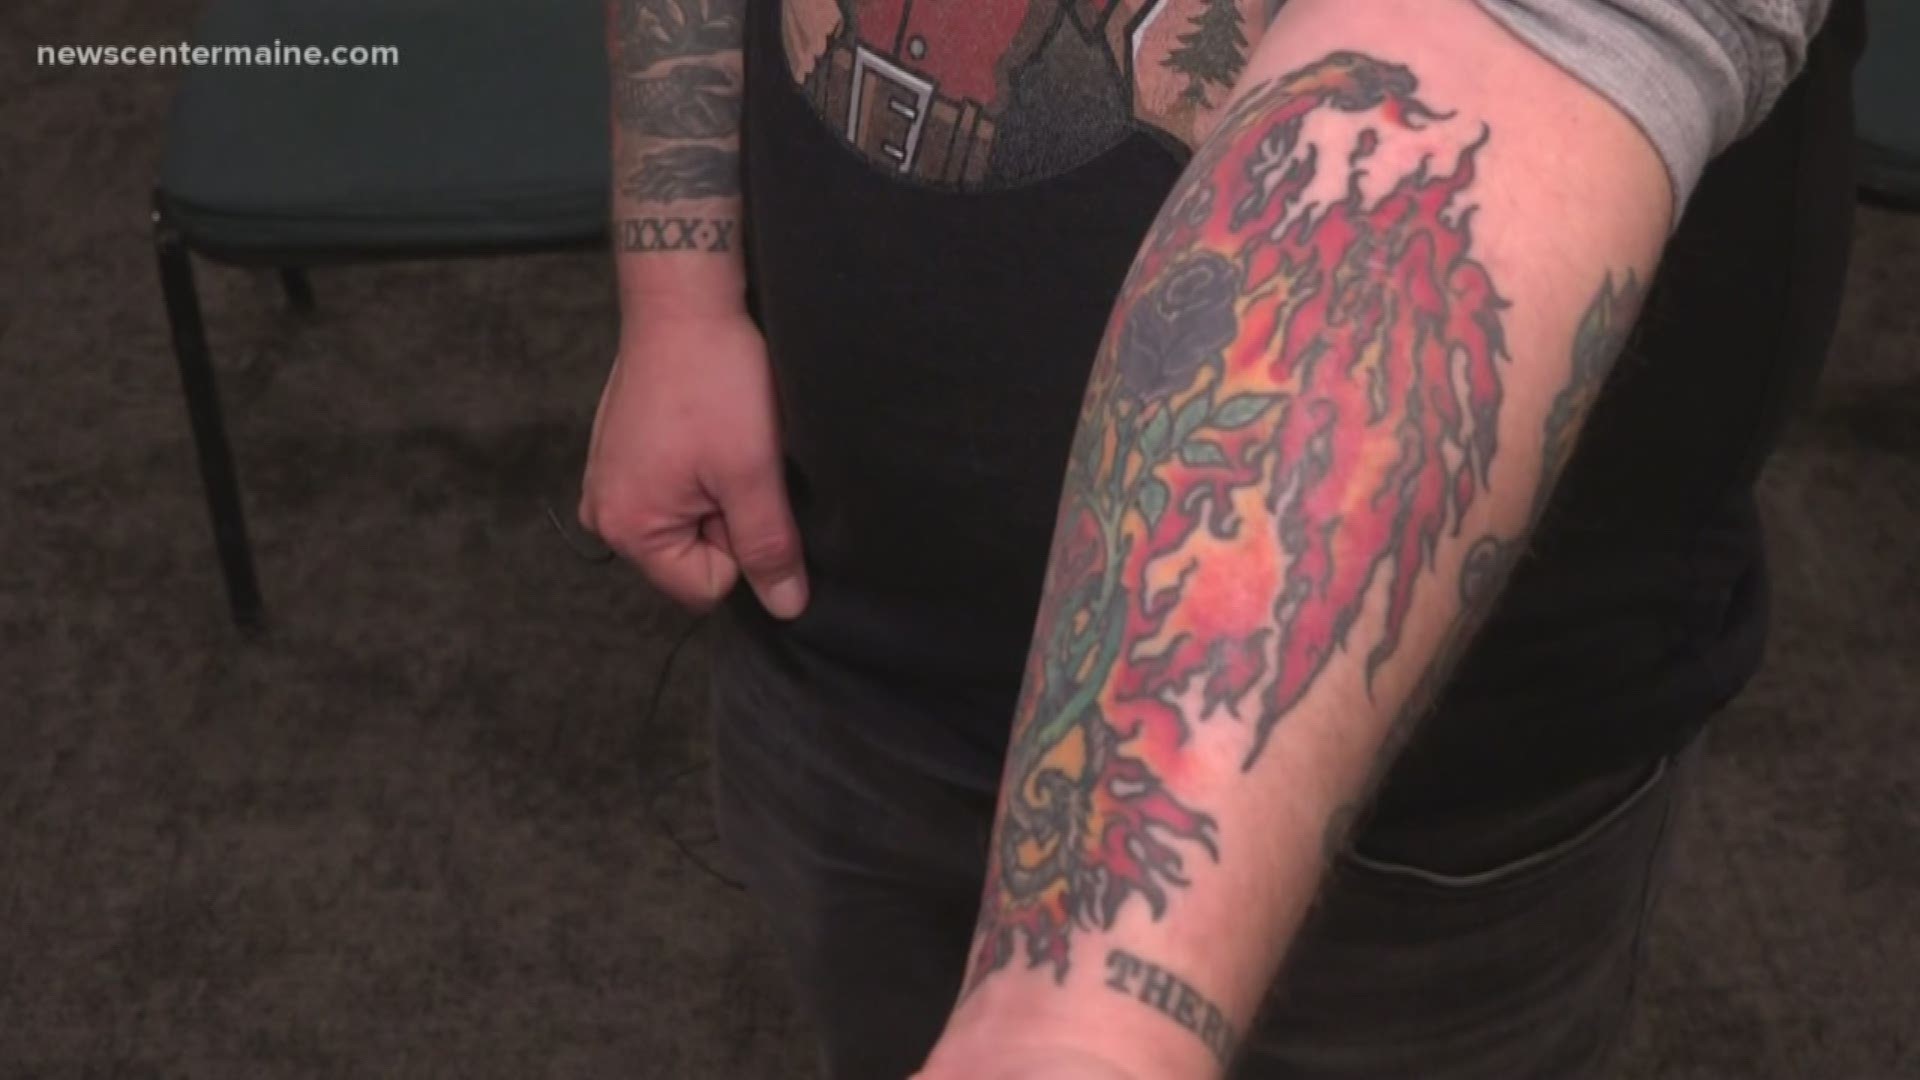 Veterans, active duty and retired, pull up their sleeves and show off their ink with members of the community to benefit the Maine Veterans Project.